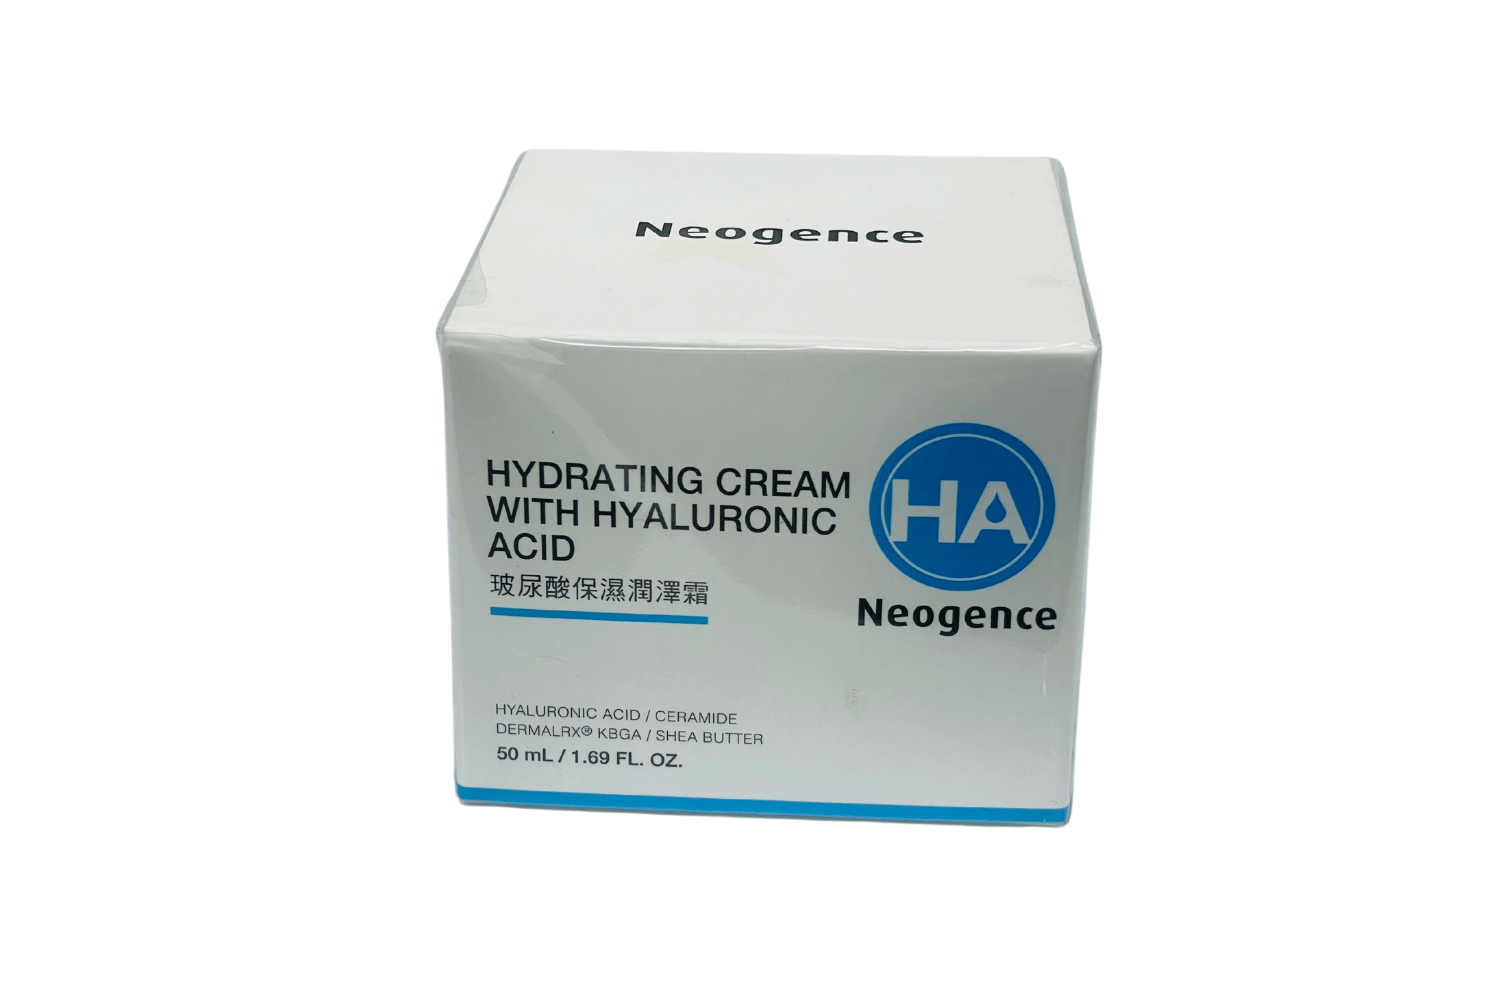 Neogence Hydrating Cream with Hyaluronic Acid (50ml):